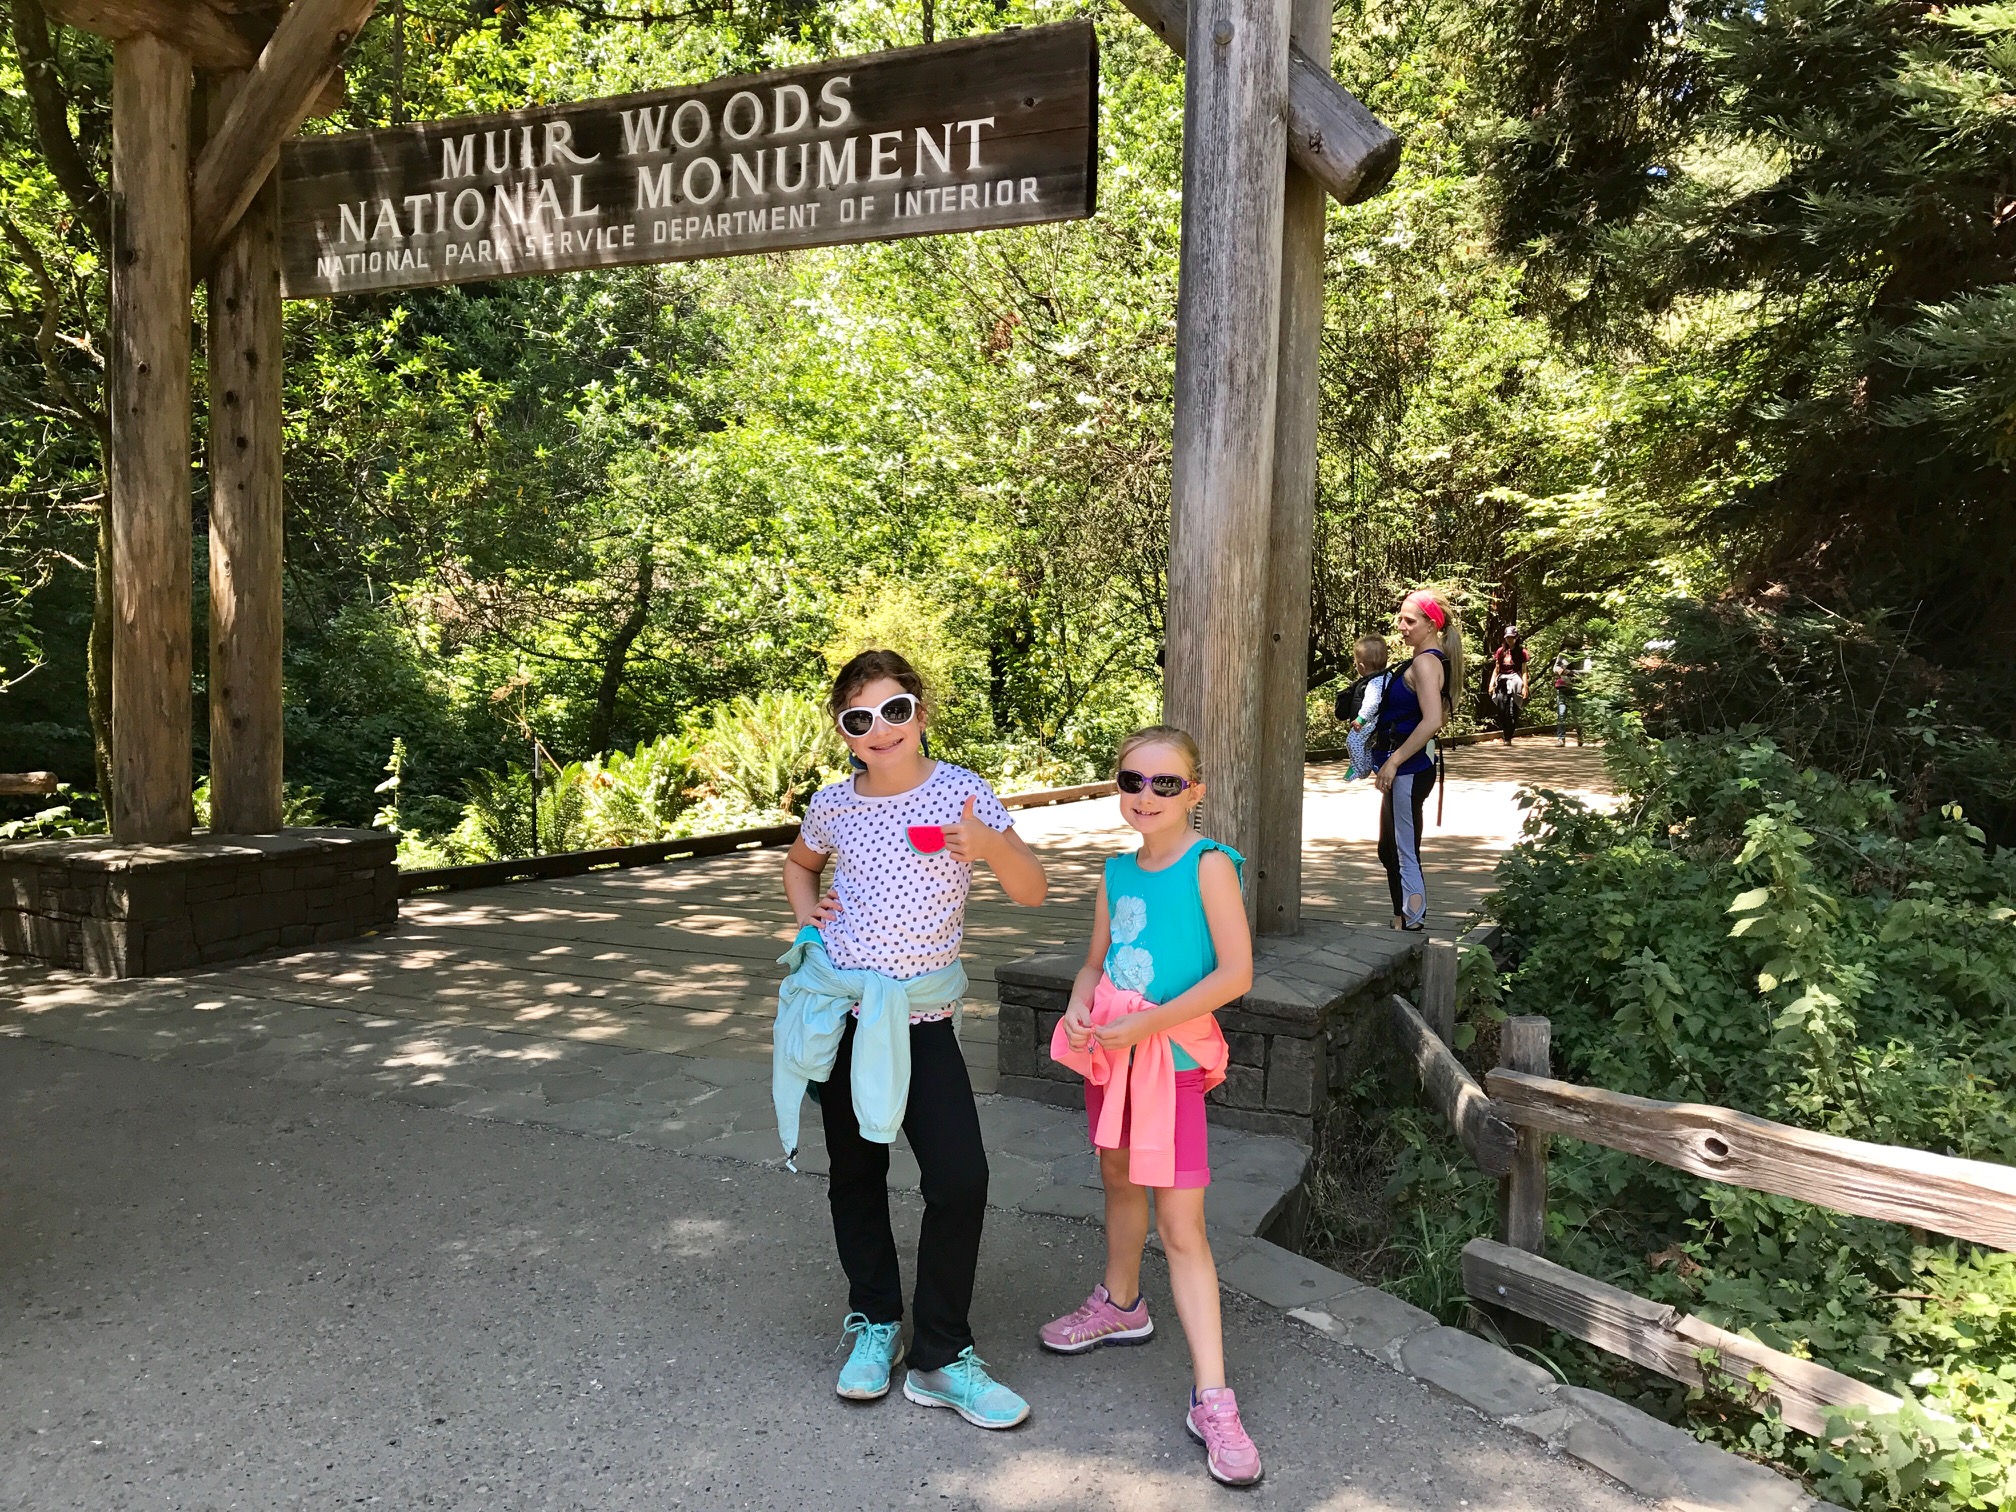 Kids at the entrance of Muir Woods National Monument